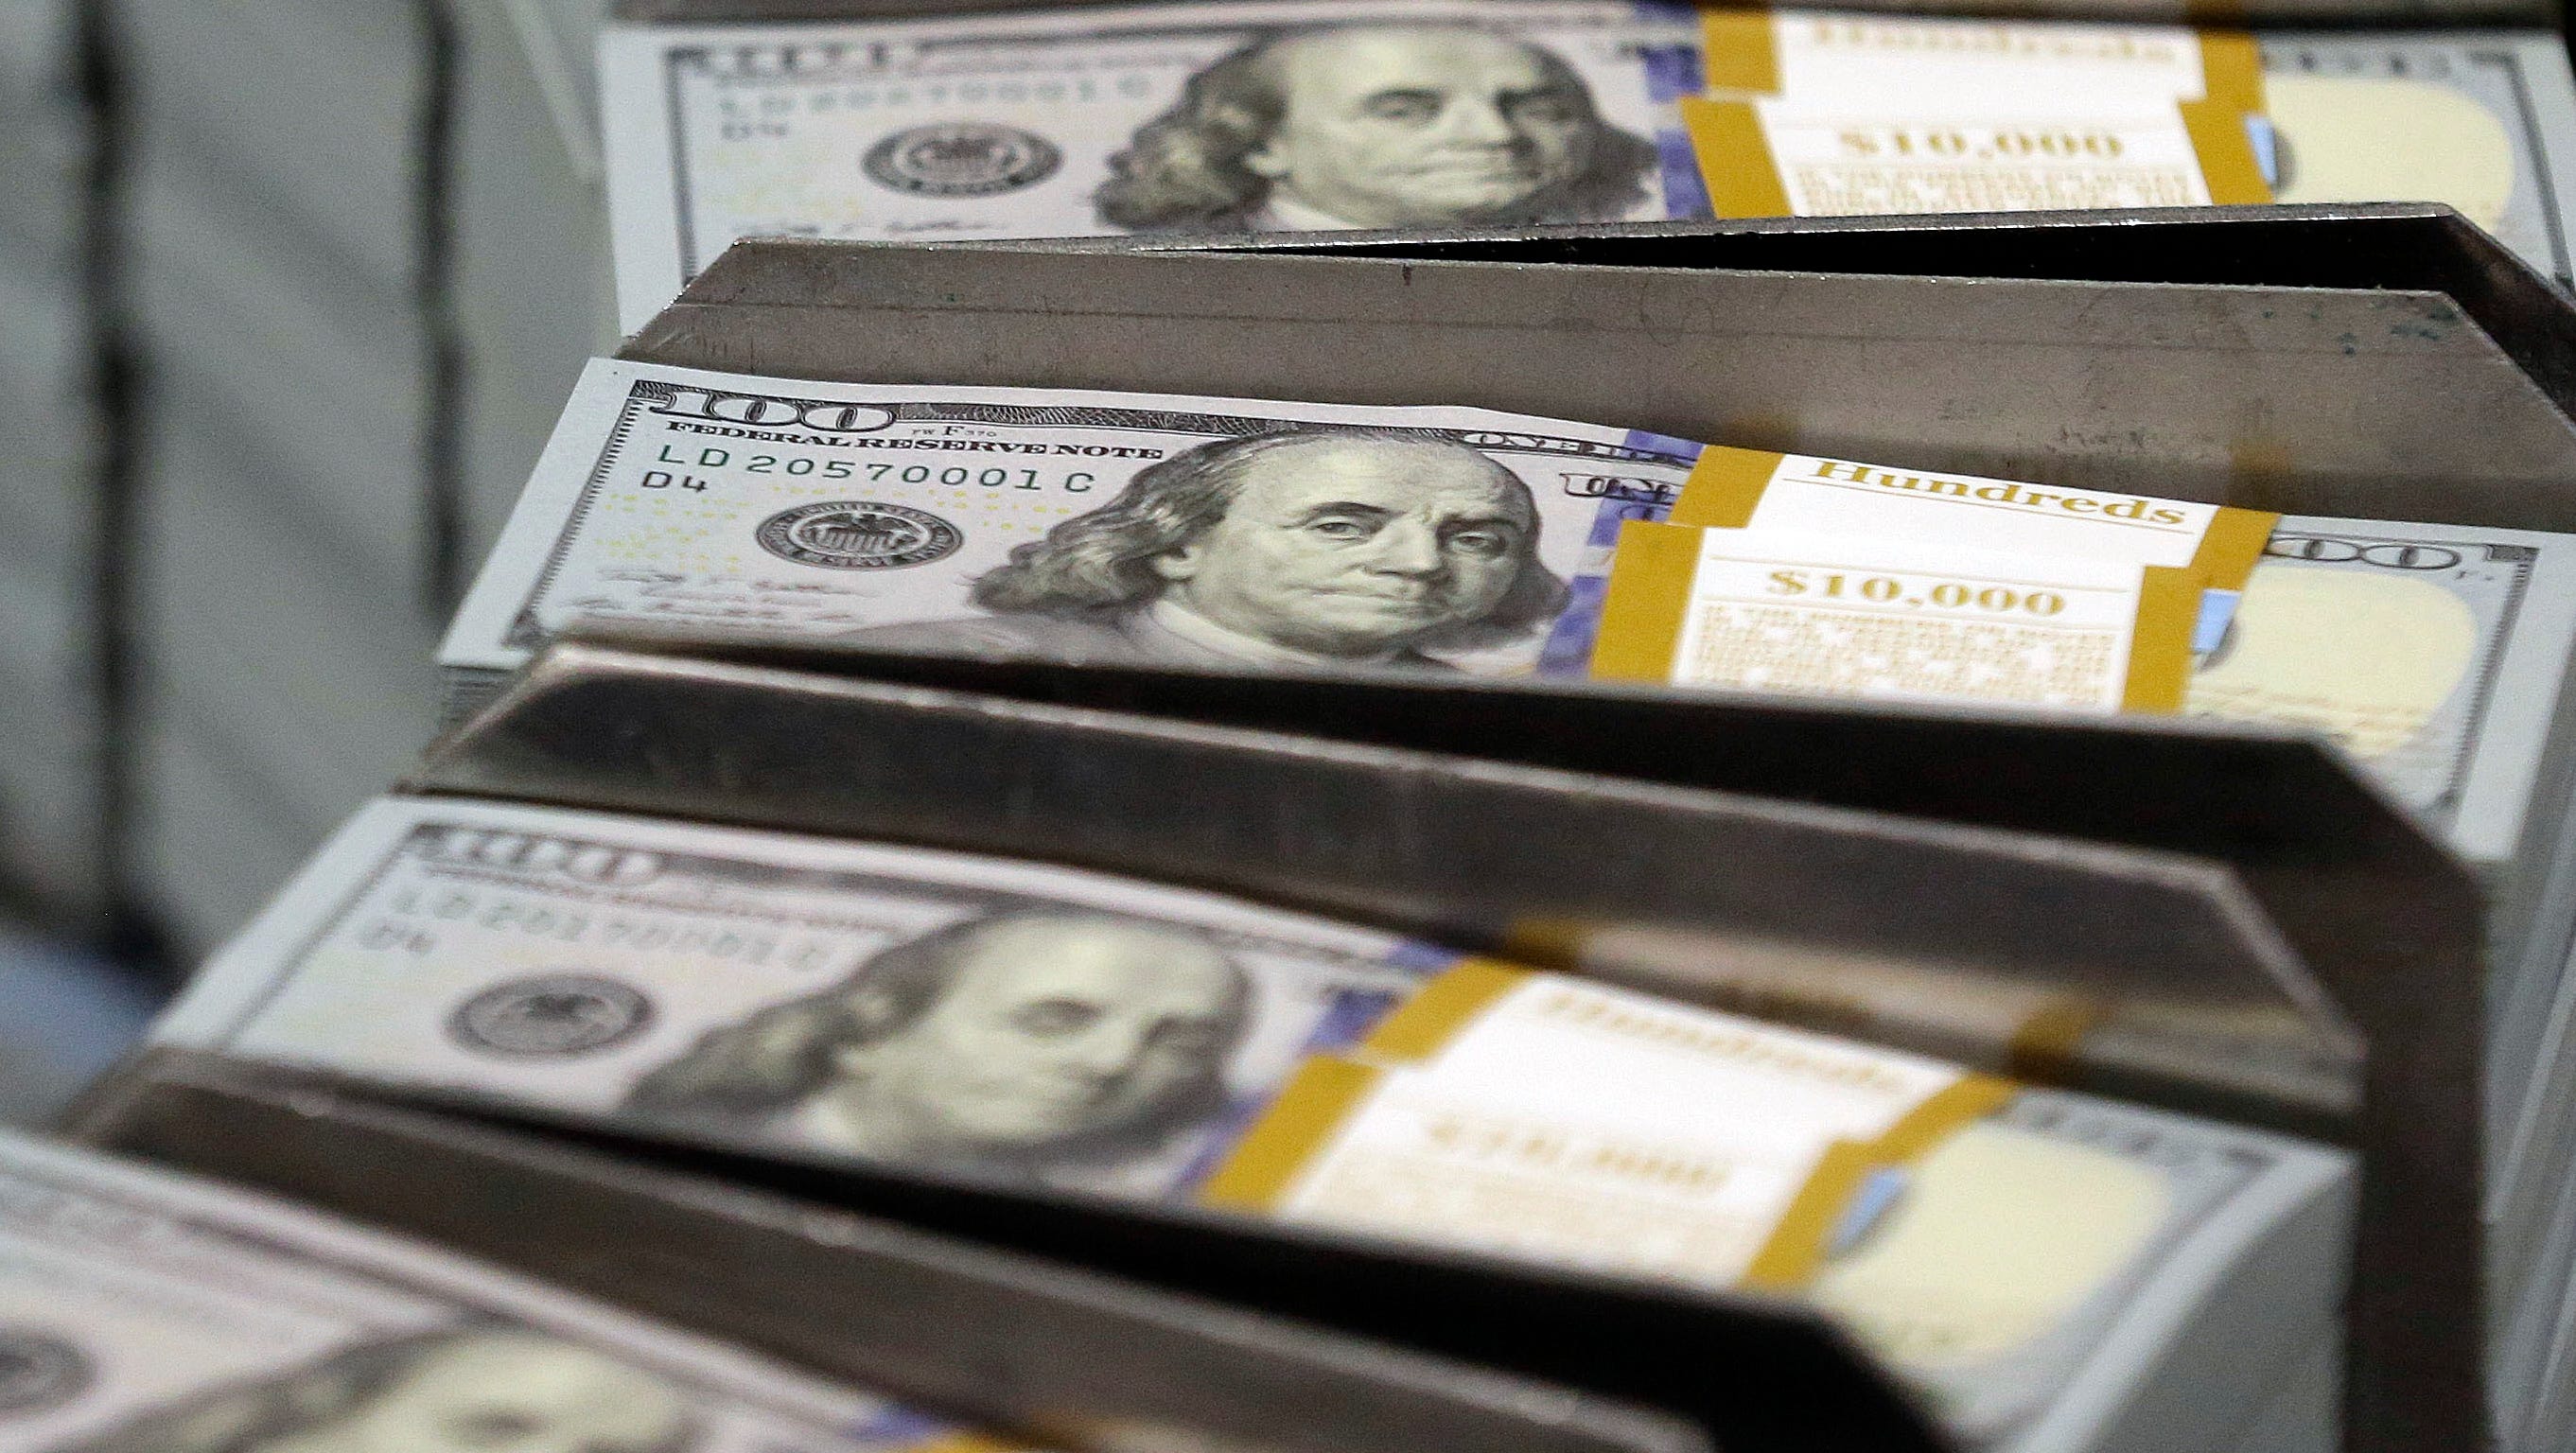 Why Does the US Continue to Print Money When Cash Is No Longer King?